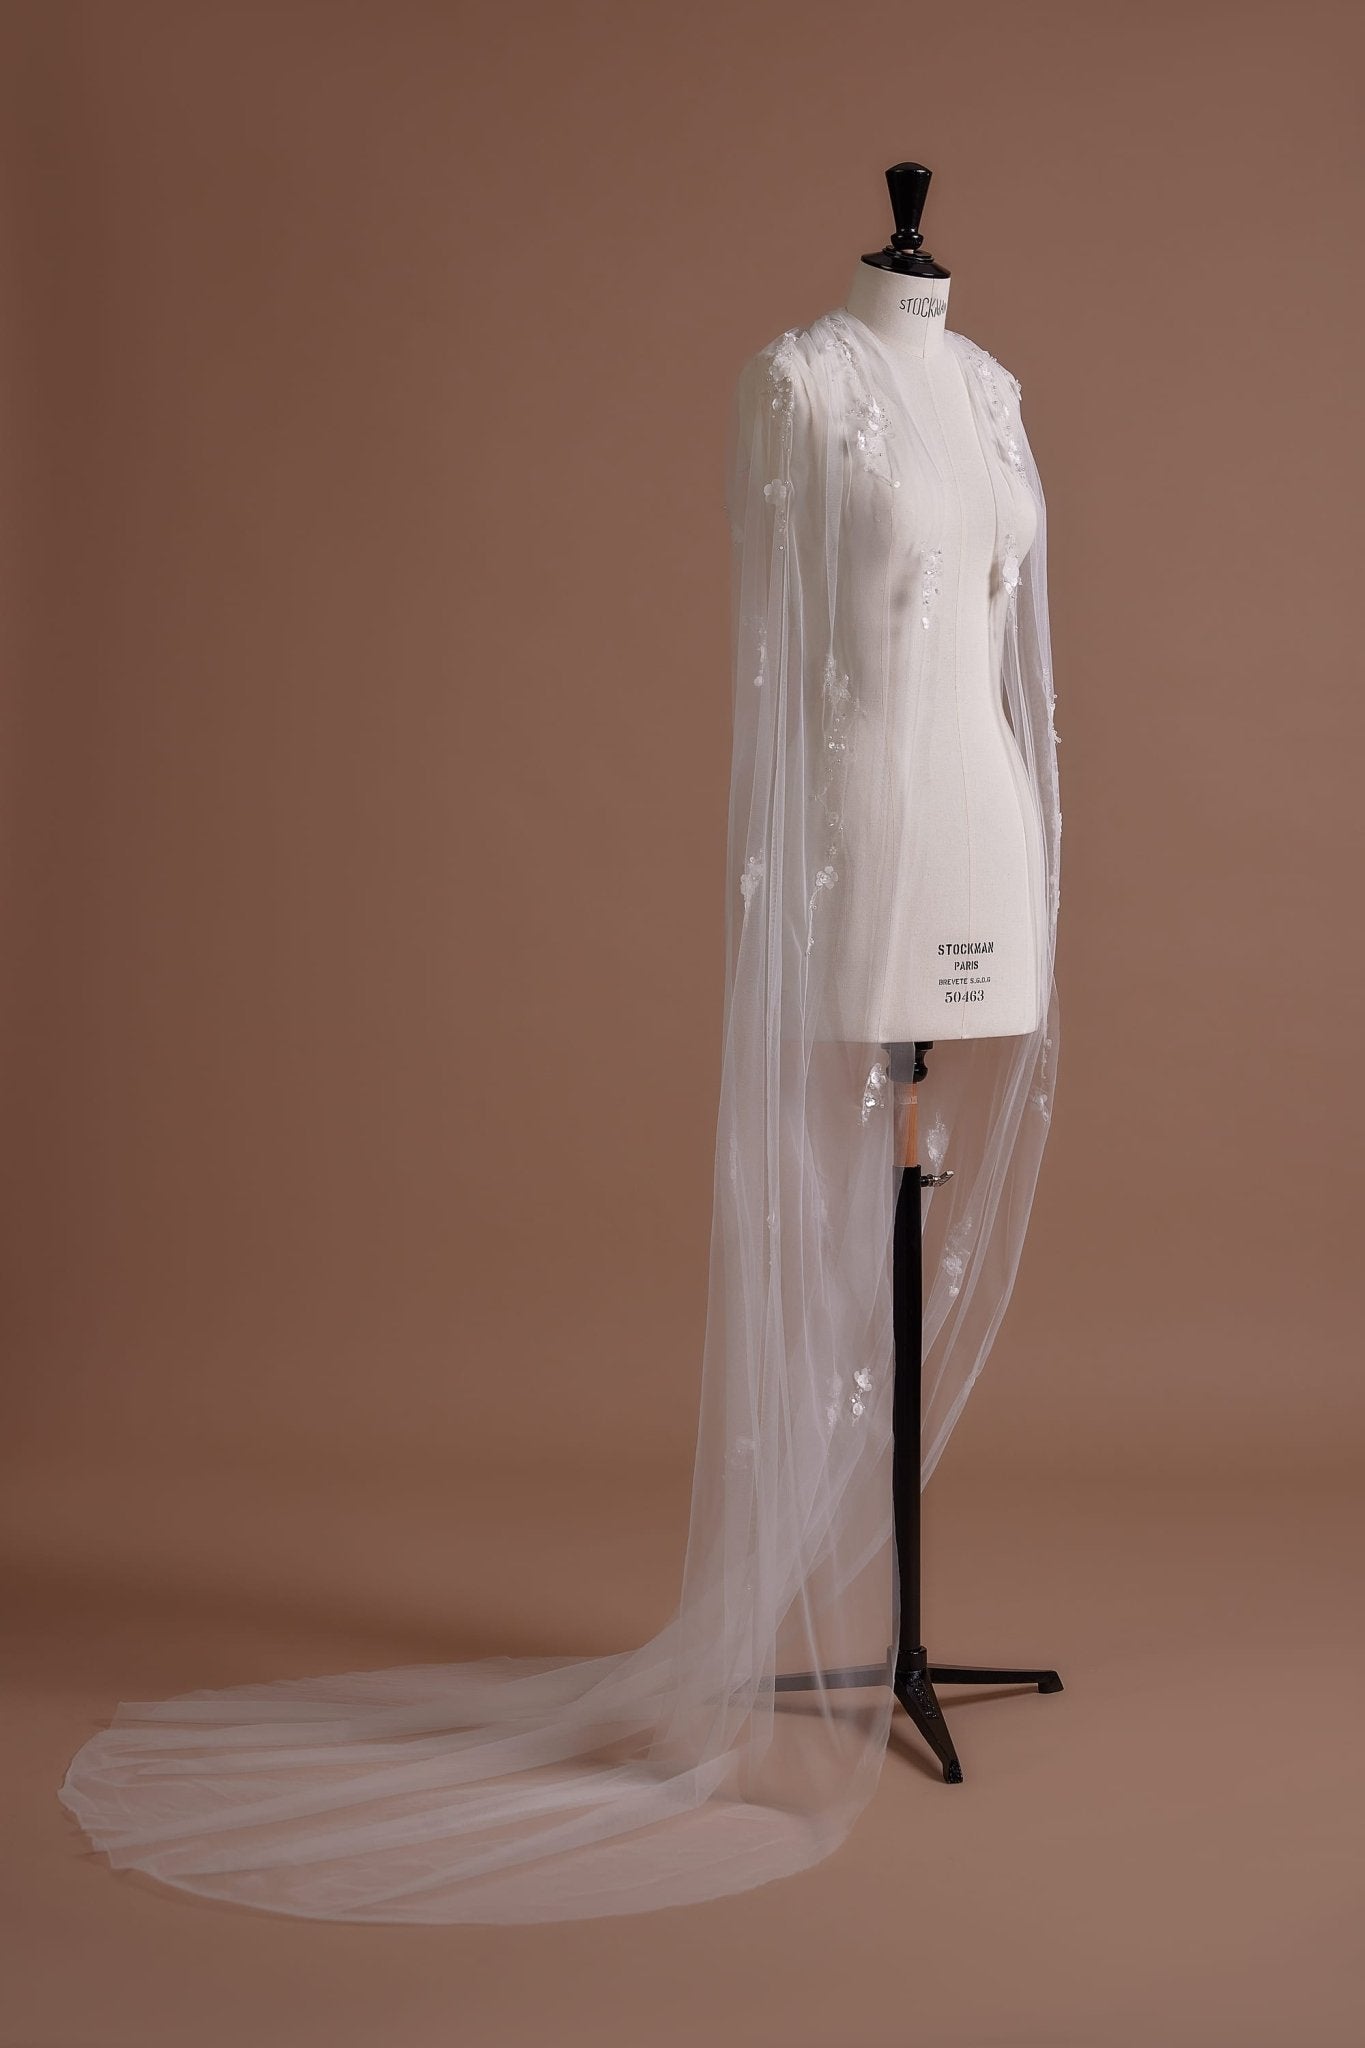 Pearl Embellished Soft Tulle Wedding Veil, Available with or without Comb - WonderlandByLilian